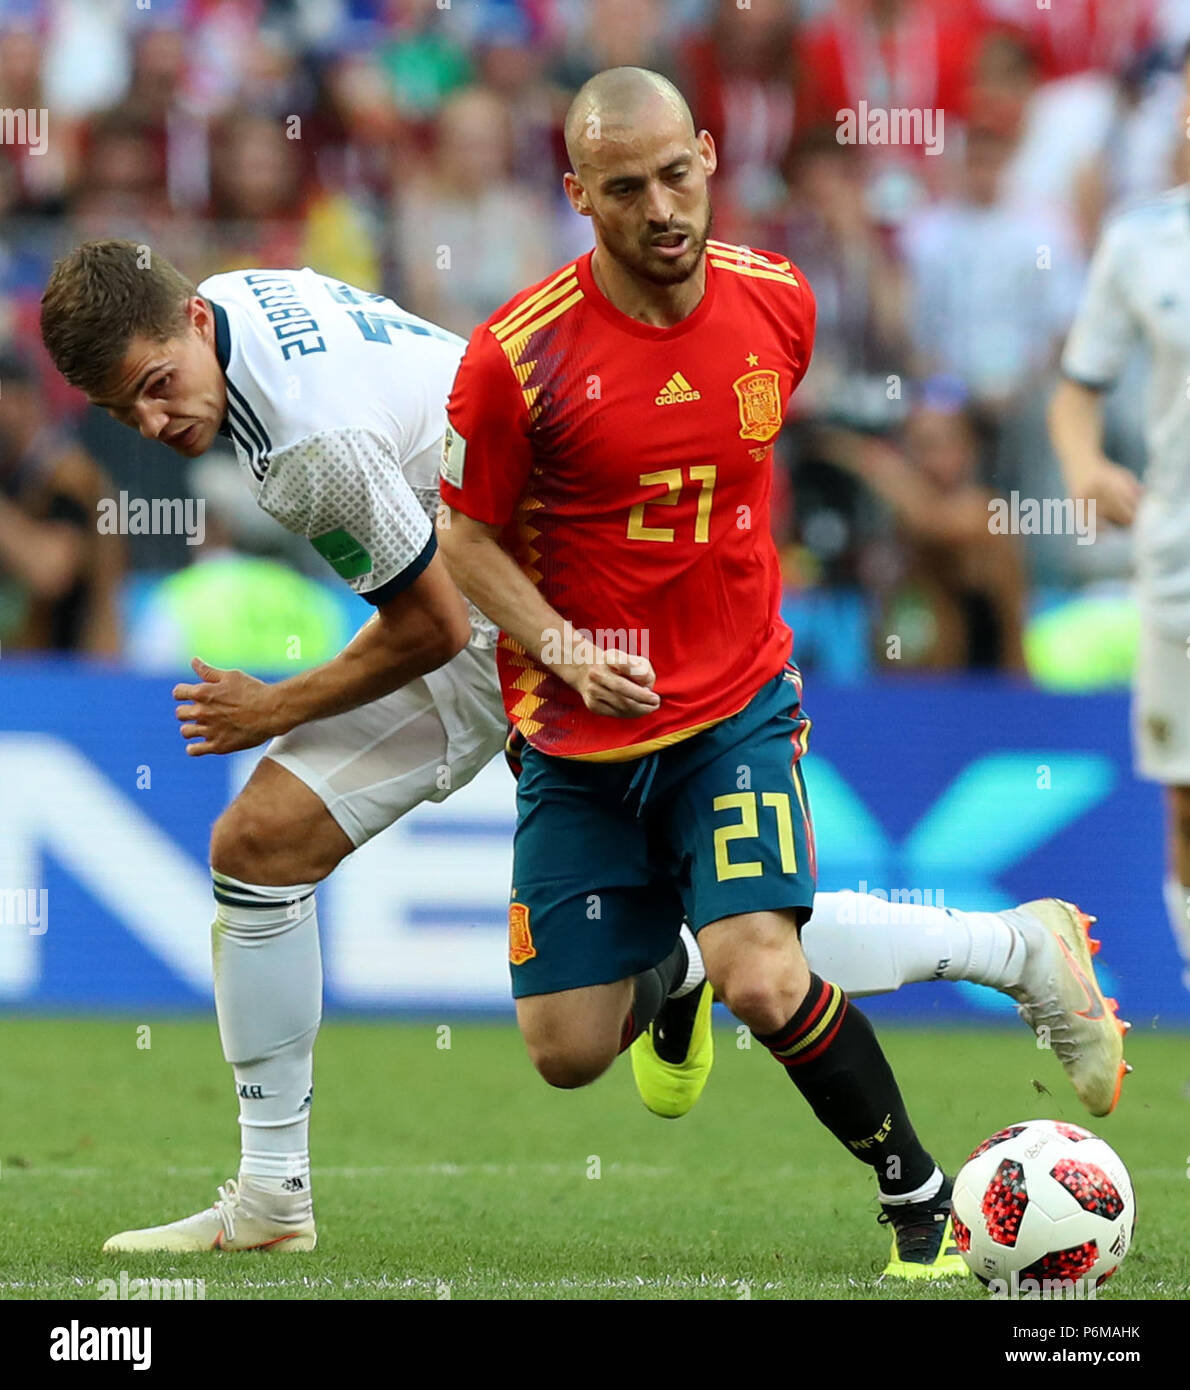 (180701) -- MOSCOW, July 1, 2018 (Xinhua) -- David Silva (R) of Spain competes during the 2018 FIFA World Cup round of 16 match between Spain and Russia in Moscow, Russia, July 1, 2018. Russia won 5-4 (4-3 in penalty shootout) and advanced to the quarter-final. (Xinhua/Yang Lei) Stock Photo